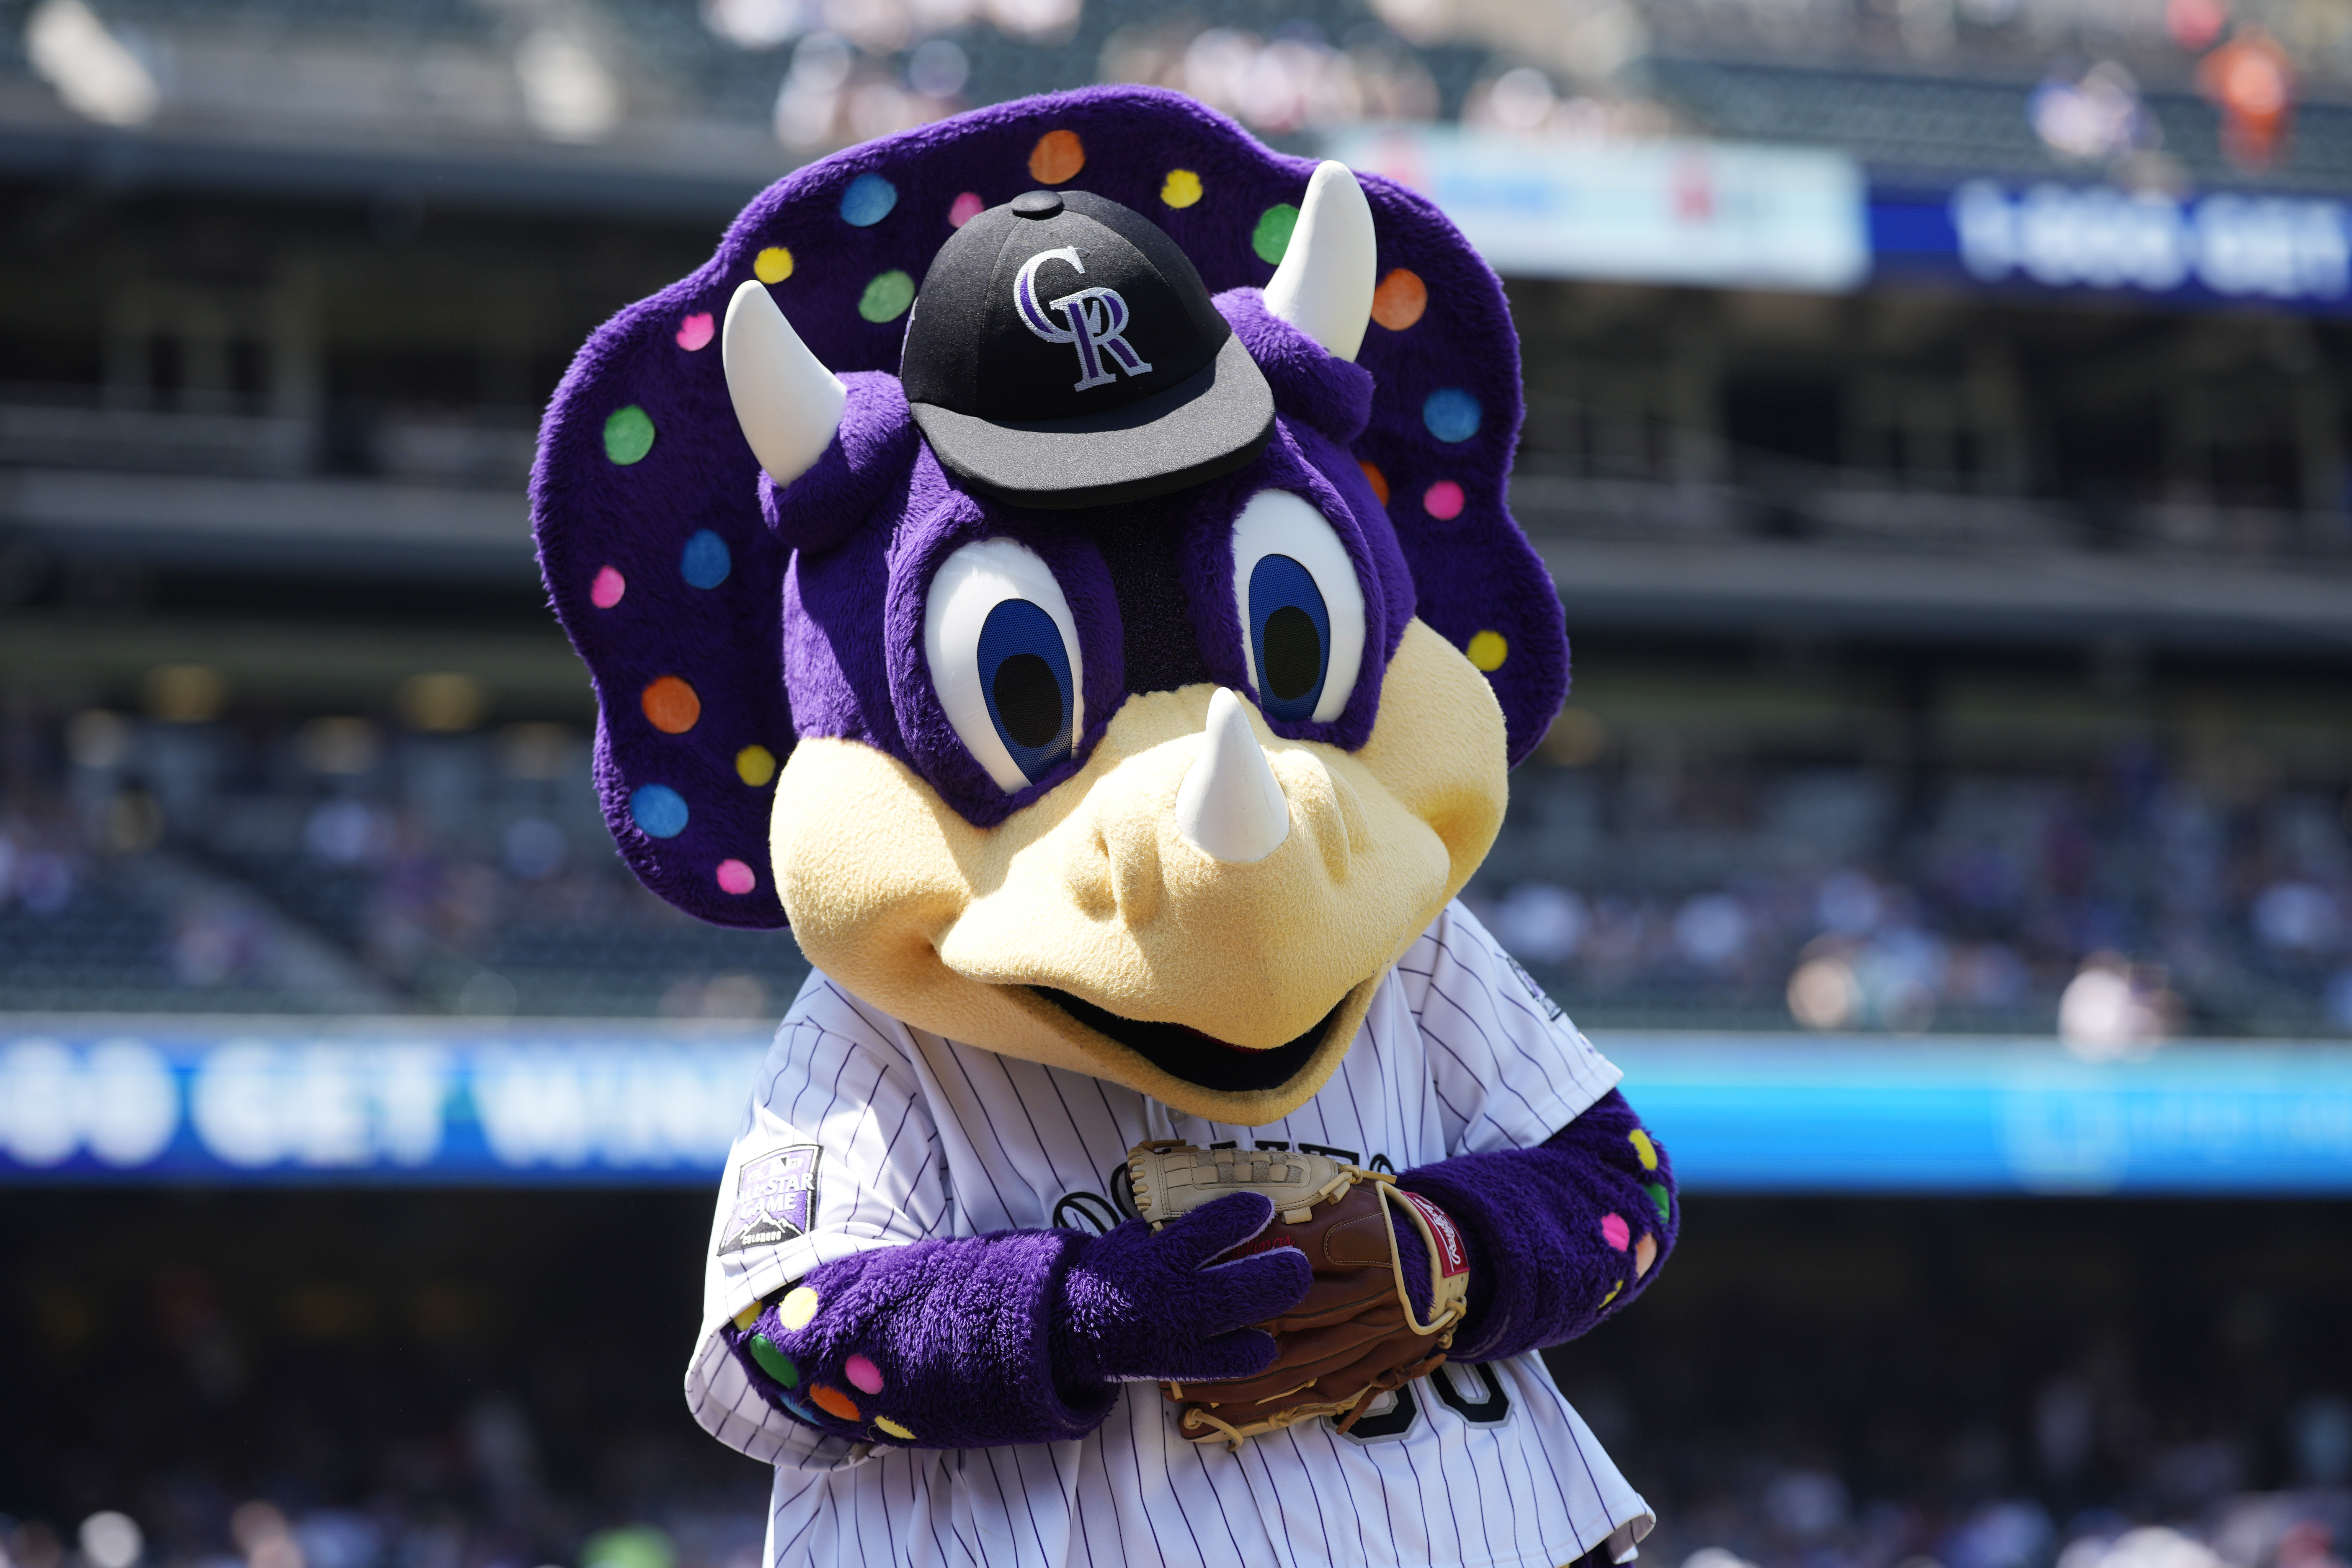 Rockies say fan wasn't using N-word after mascot video emerges